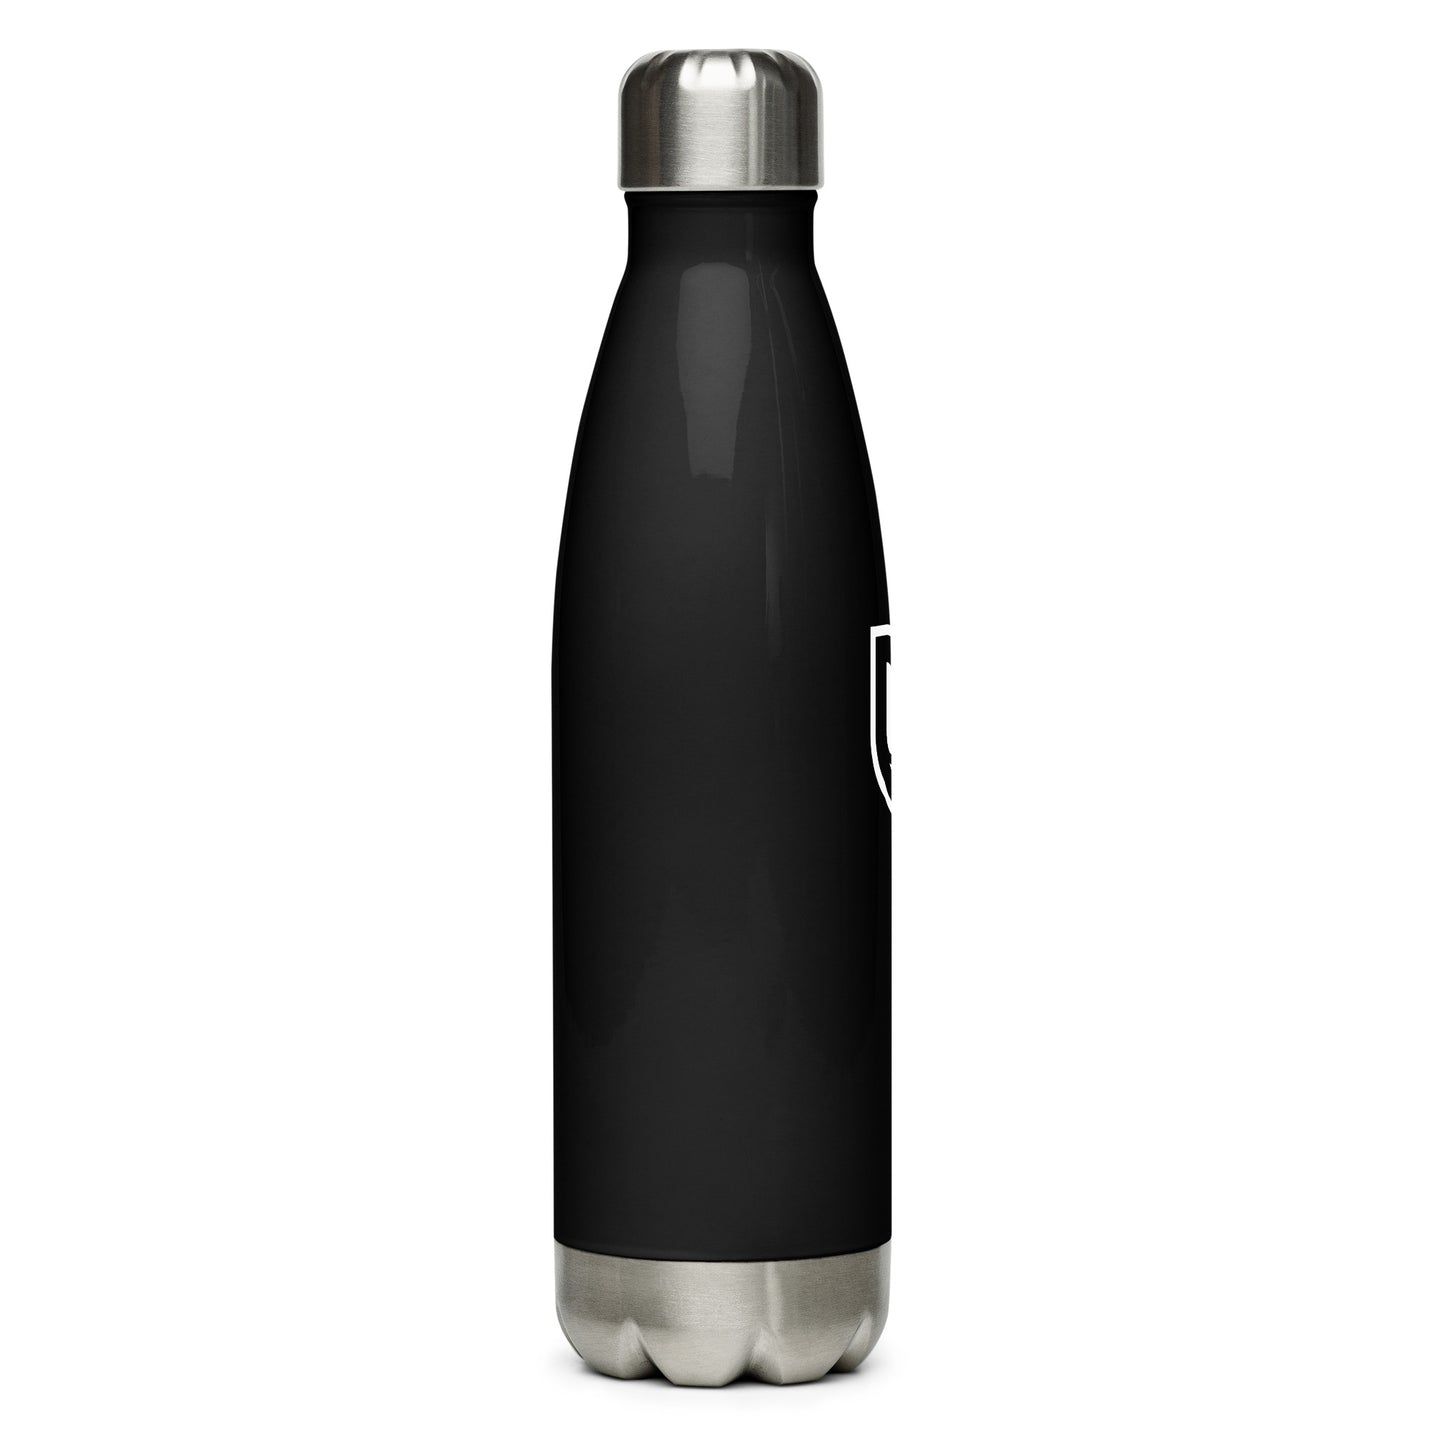 Shiled Stainless steel water bottle